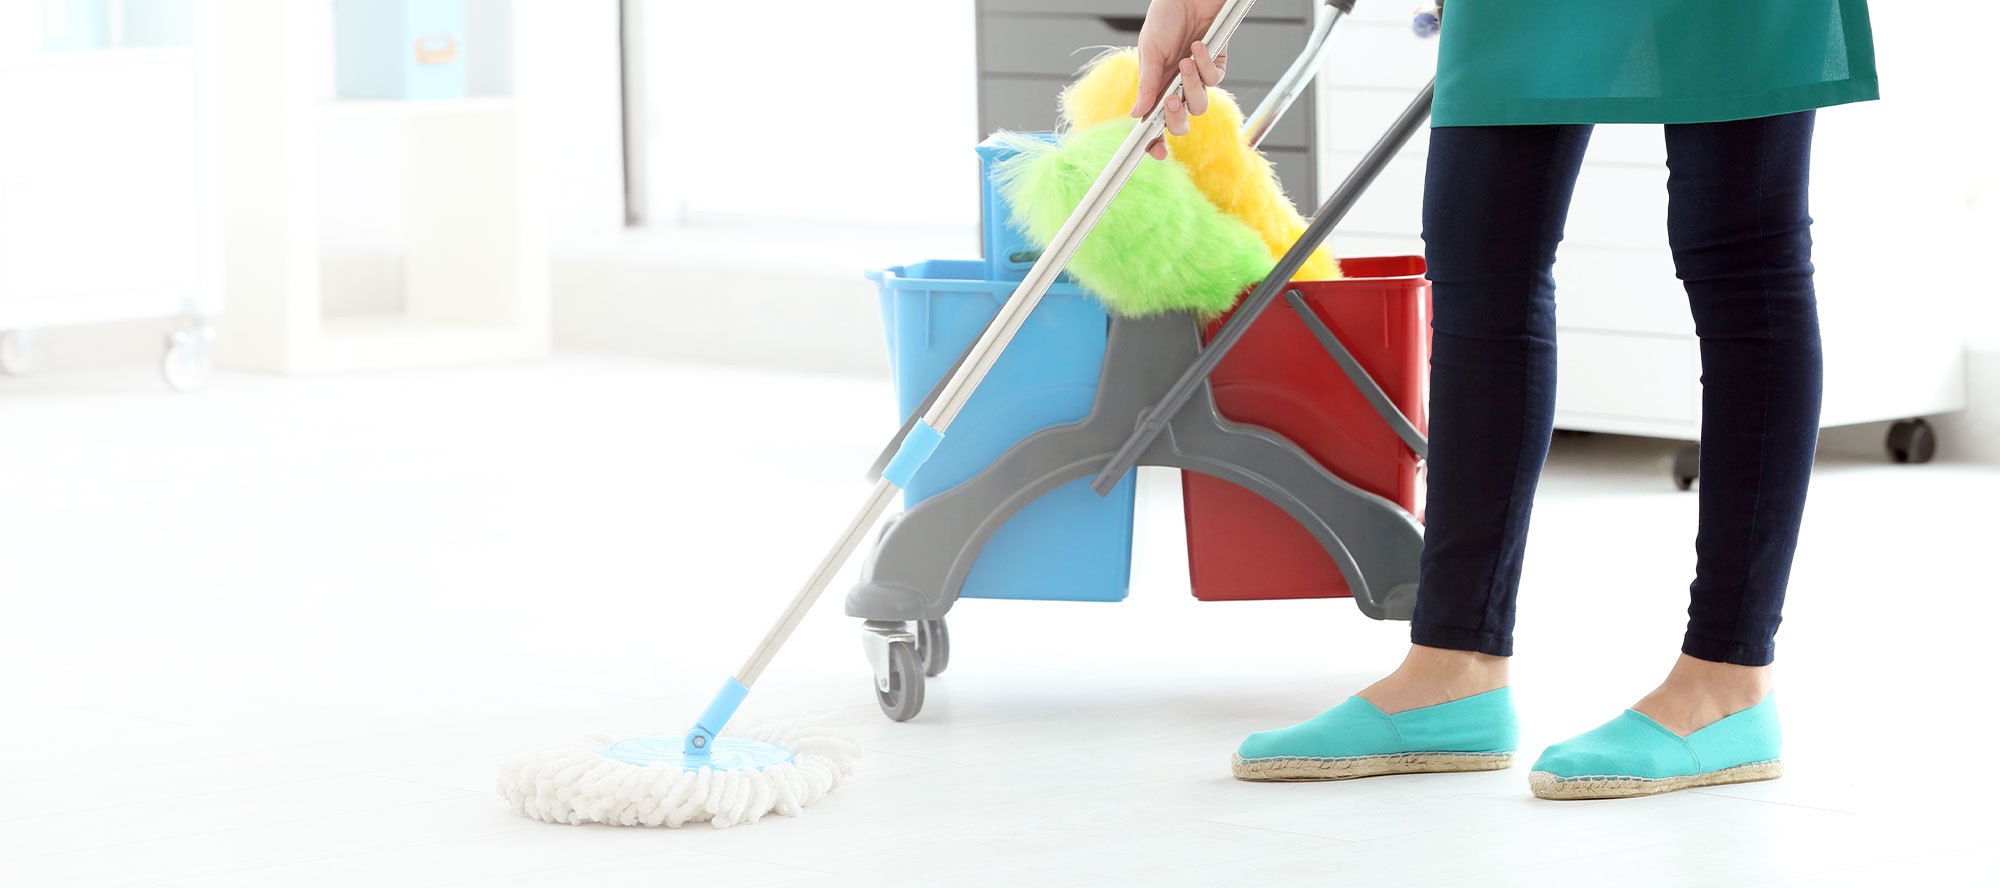 Commercial Office Cleaning & Janitorial Services In Kitchener, ON